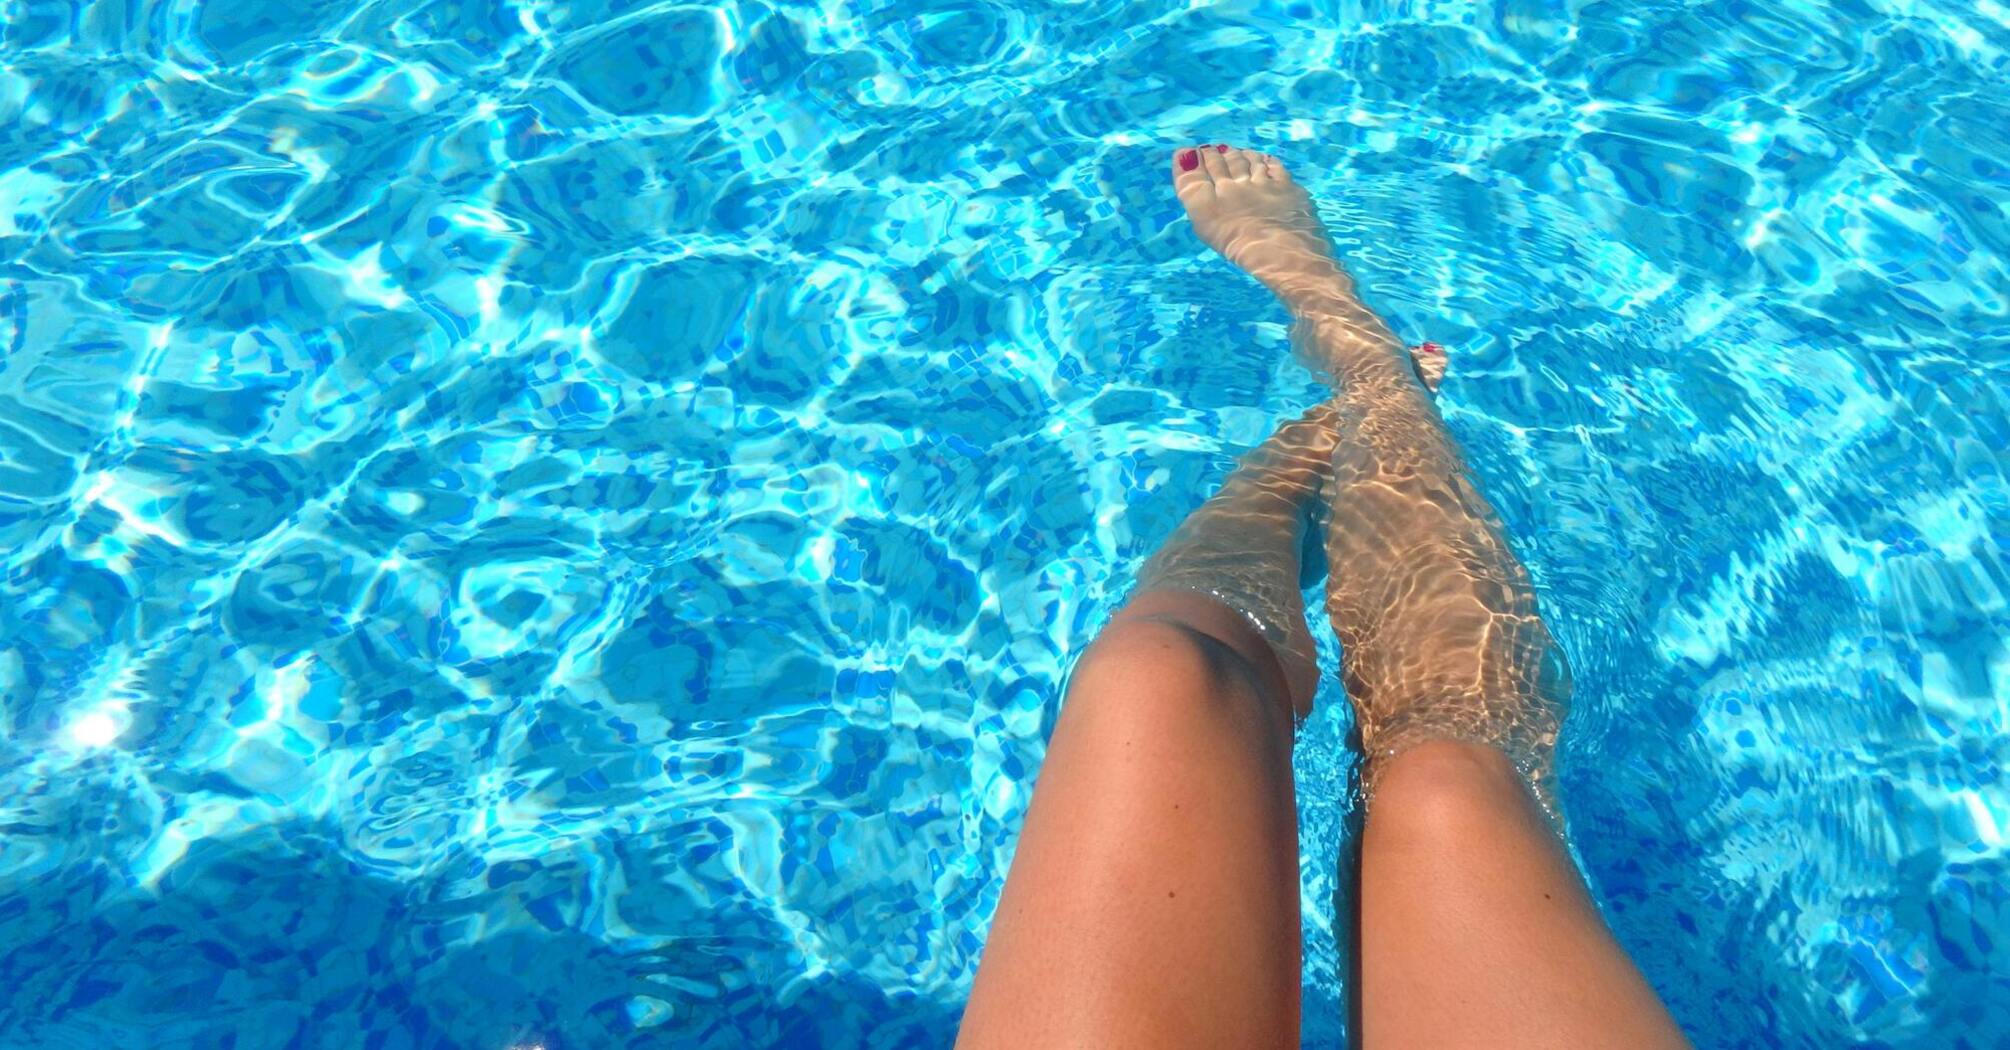 Person's legs dangling in clear blue pool water, with sunlight reflecting off the ripples 